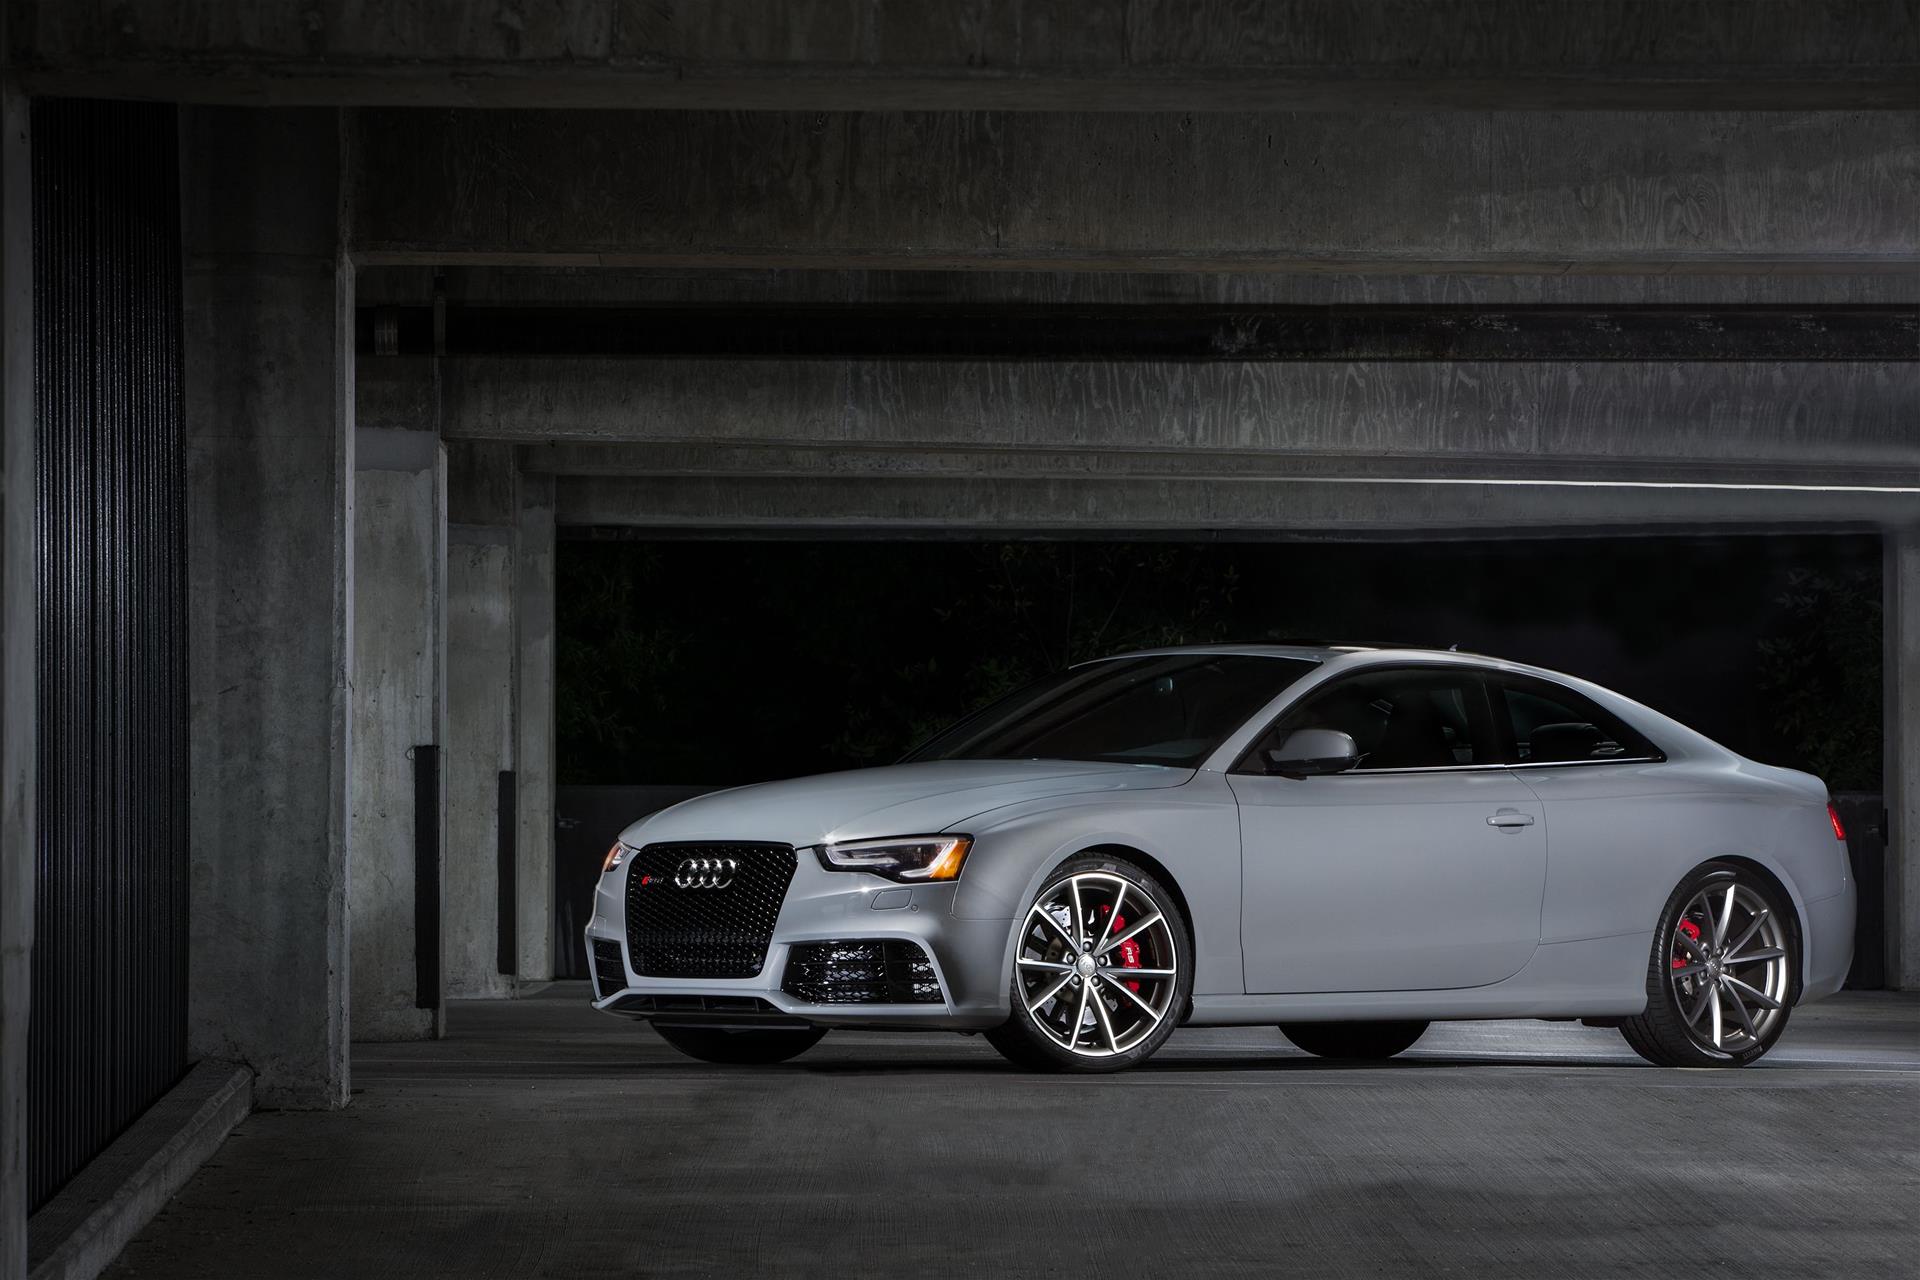 2015 Audi Rs5 Sport Edition Pictures And Wallpaper - 2015 Audi Rs 5 - HD Wallpaper 